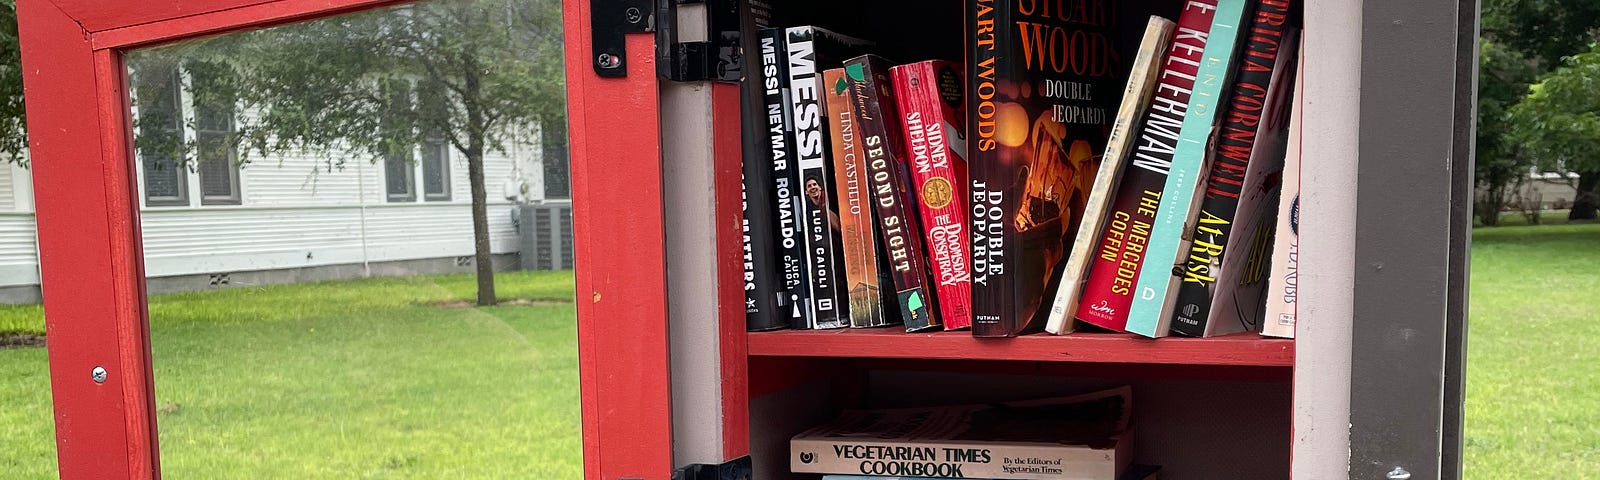 Little Free Library book box